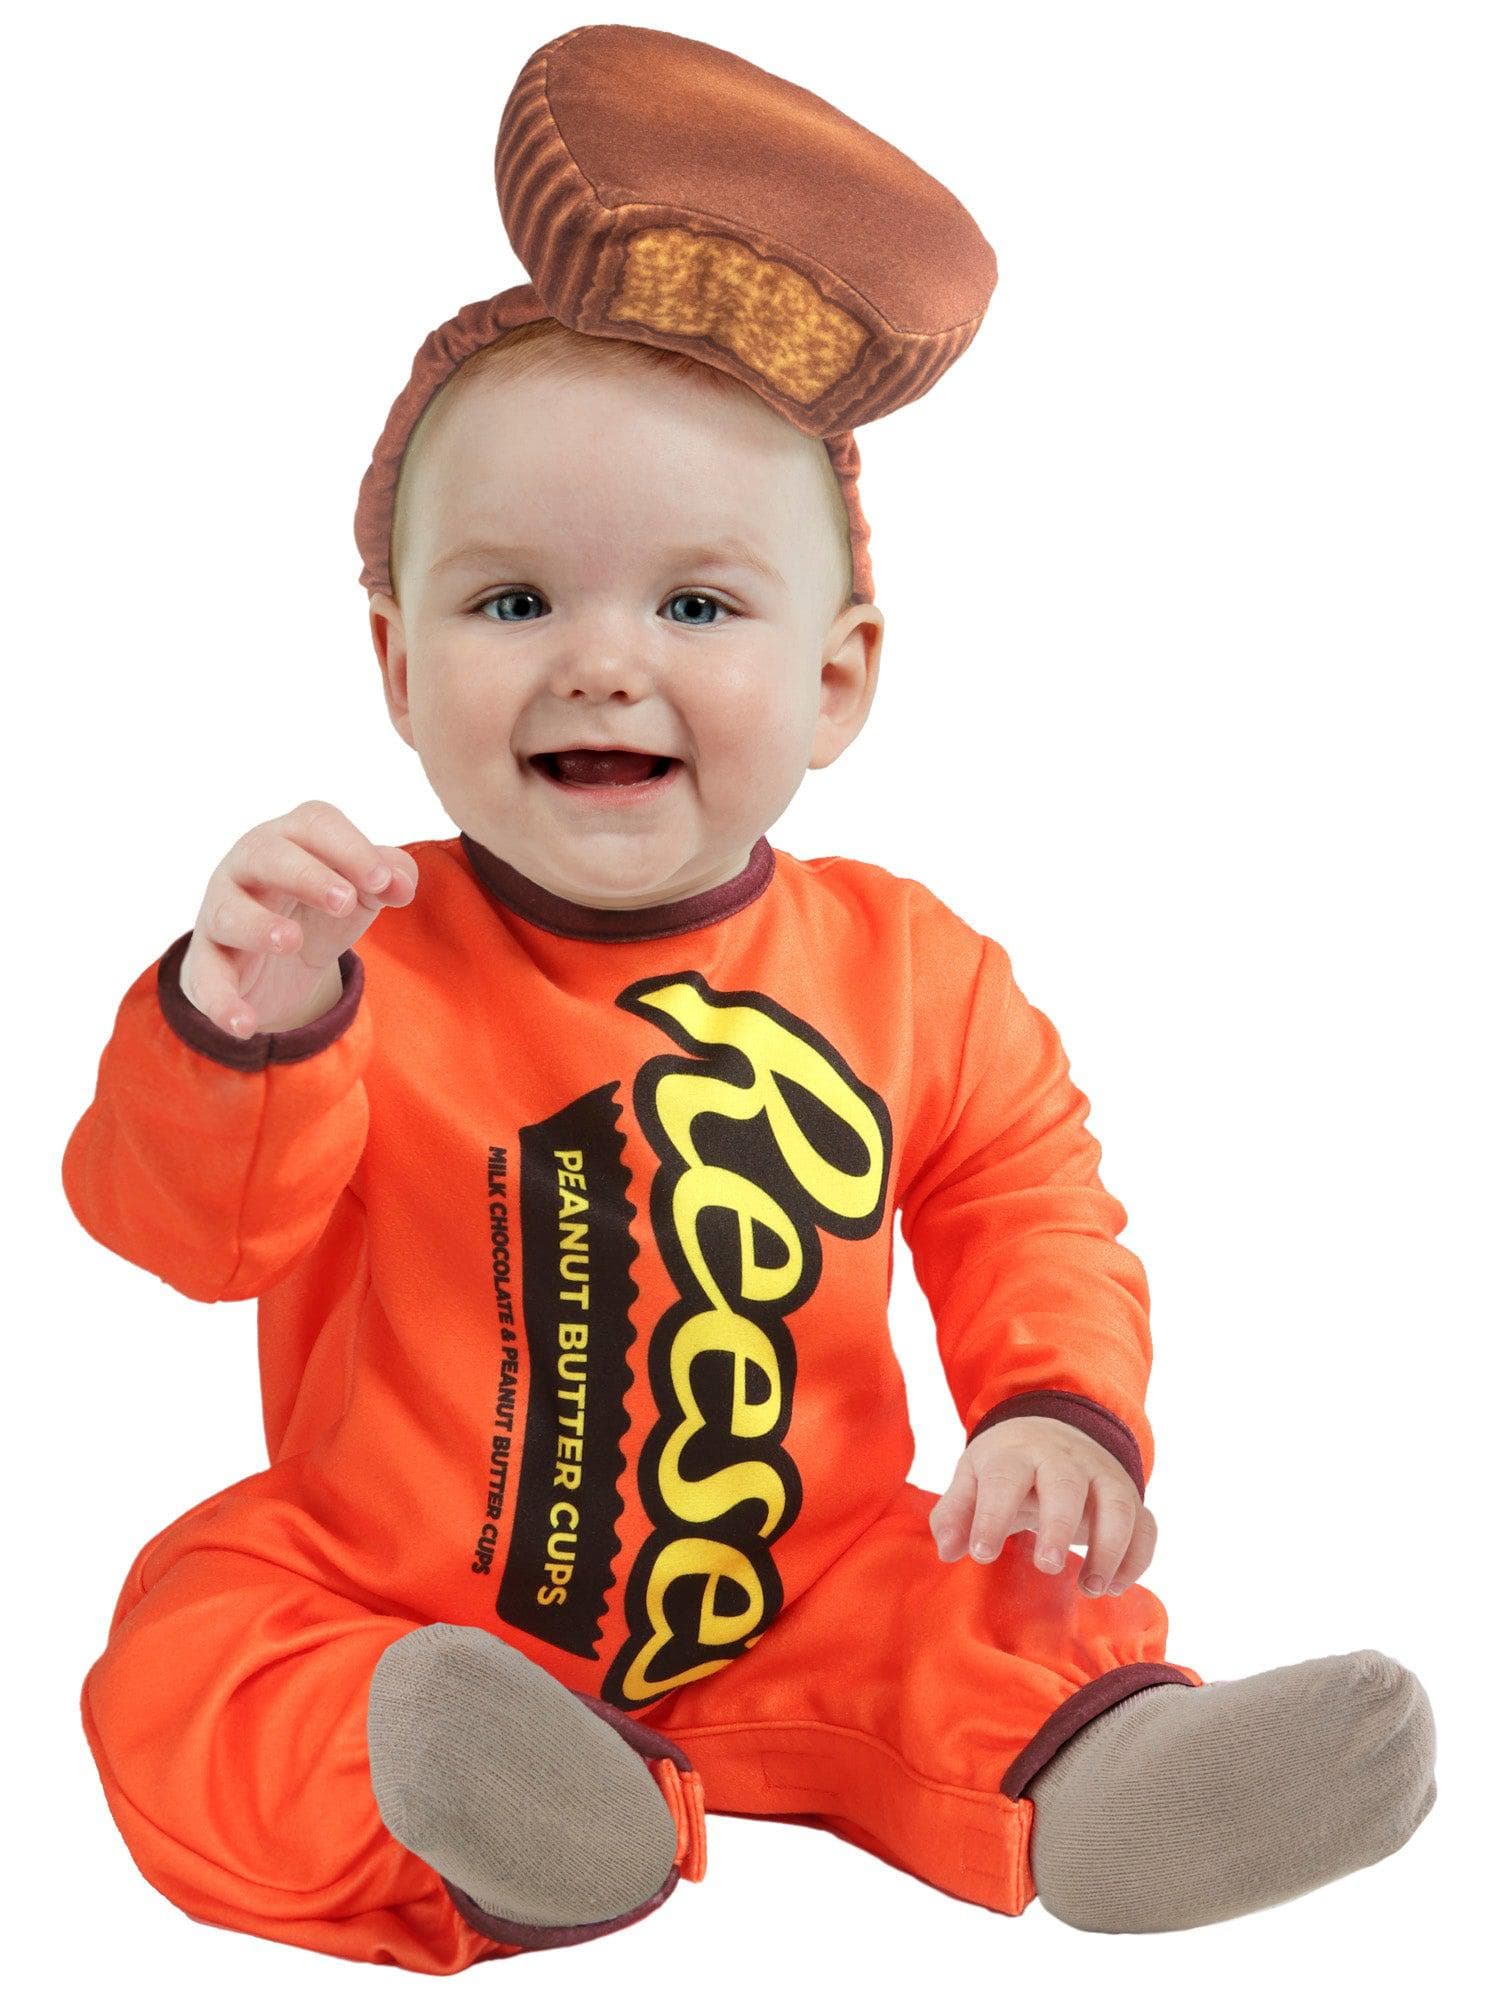 Reese's Peanut Butter Cup Baby/Toddler Costume - costumes.com